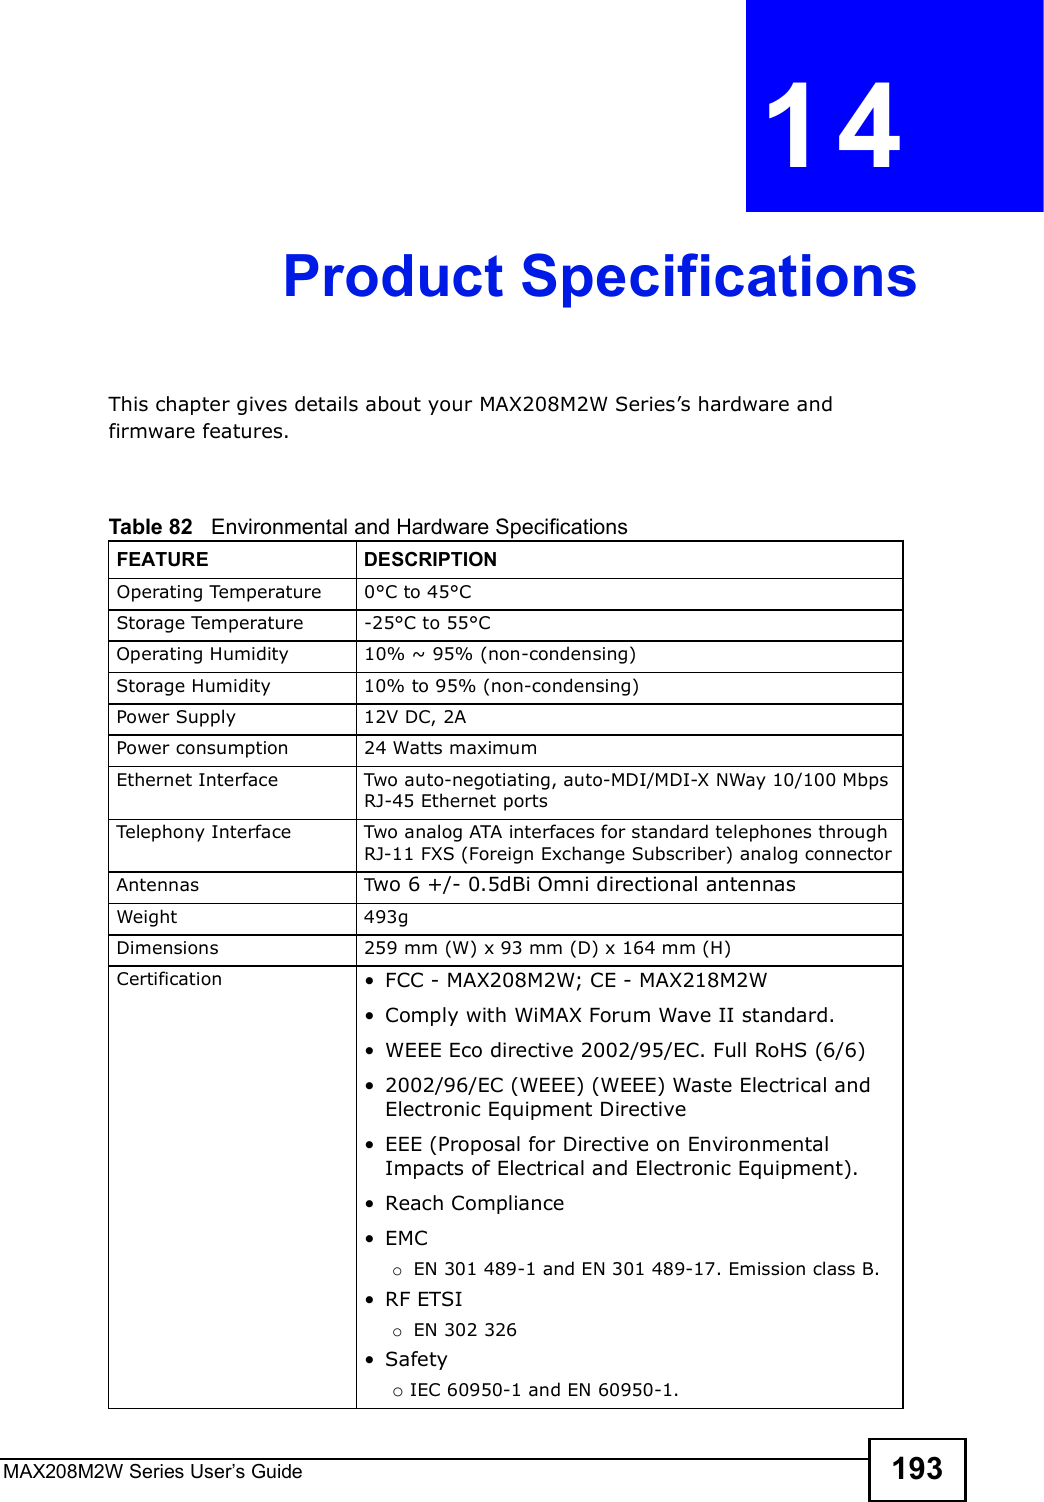 MAX208M2W Series User s Guide 193CHAPTER  14 Product SpecificationsThis chapter gives details about your MAX208M2W Series s hardware and firmware features.                     Table 82   Environmental and Hardware SpecificationsFEATUREDESCRIPTIONOperating Temperature0°C to 45°CStorage Temperature-25°C to 55°COperating Humidity10% ~ 95% (non-condensing)Storage Humidity 10% to 95% (non-condensing)Power Supply12V DC, 2APower consumption24 Watts maximumEthernet InterfaceTwo auto-negotiating, auto-MDI/MDI-X NWay 10/100 Mbps RJ-45 Ethernet portsTelephony InterfaceTwo analog ATA interfaces for standard telephones through RJ-11 FXS (Foreign Exchange Subscriber) analog connectorAntennasTwo 6 +/- 0.5dBi Omni directional antennasWeight493gDimensions259 mm (W) x 93 mm (D) x 164 mm (H)Certification !FCC - MAX208M2W; CE - MAX218M2W!Comply with WiMAX Forum Wave II standard.!WEEE Eco directive 2002/95/EC. Full RoHS (6/6)!2002/96/EC (WEEE) (WEEE) Waste Electrical and Electronic Equipment Directive!EEE (Proposal for Directive on Environmental Impacts of Electrical and Electronic Equipment).!Reach Compliance!EMCo EN 301 489-1 and EN 301 489-17. Emission class B.!RF ETSIo EN 302 326!Safetyo IEC 60950-1 and EN 60950-1.